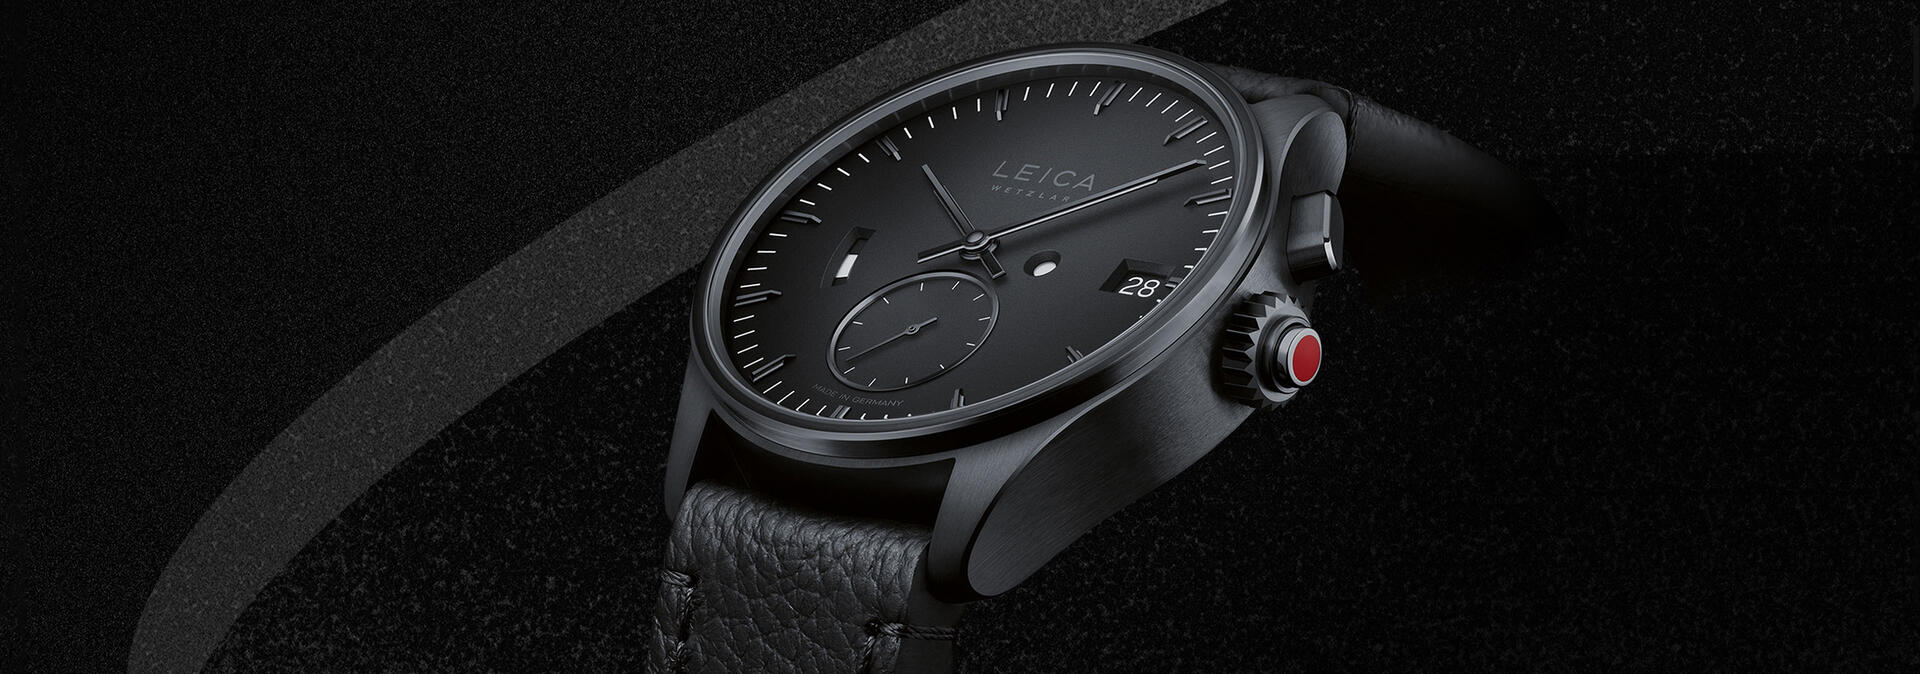 Leica Watch - Symbiosis of design and technology